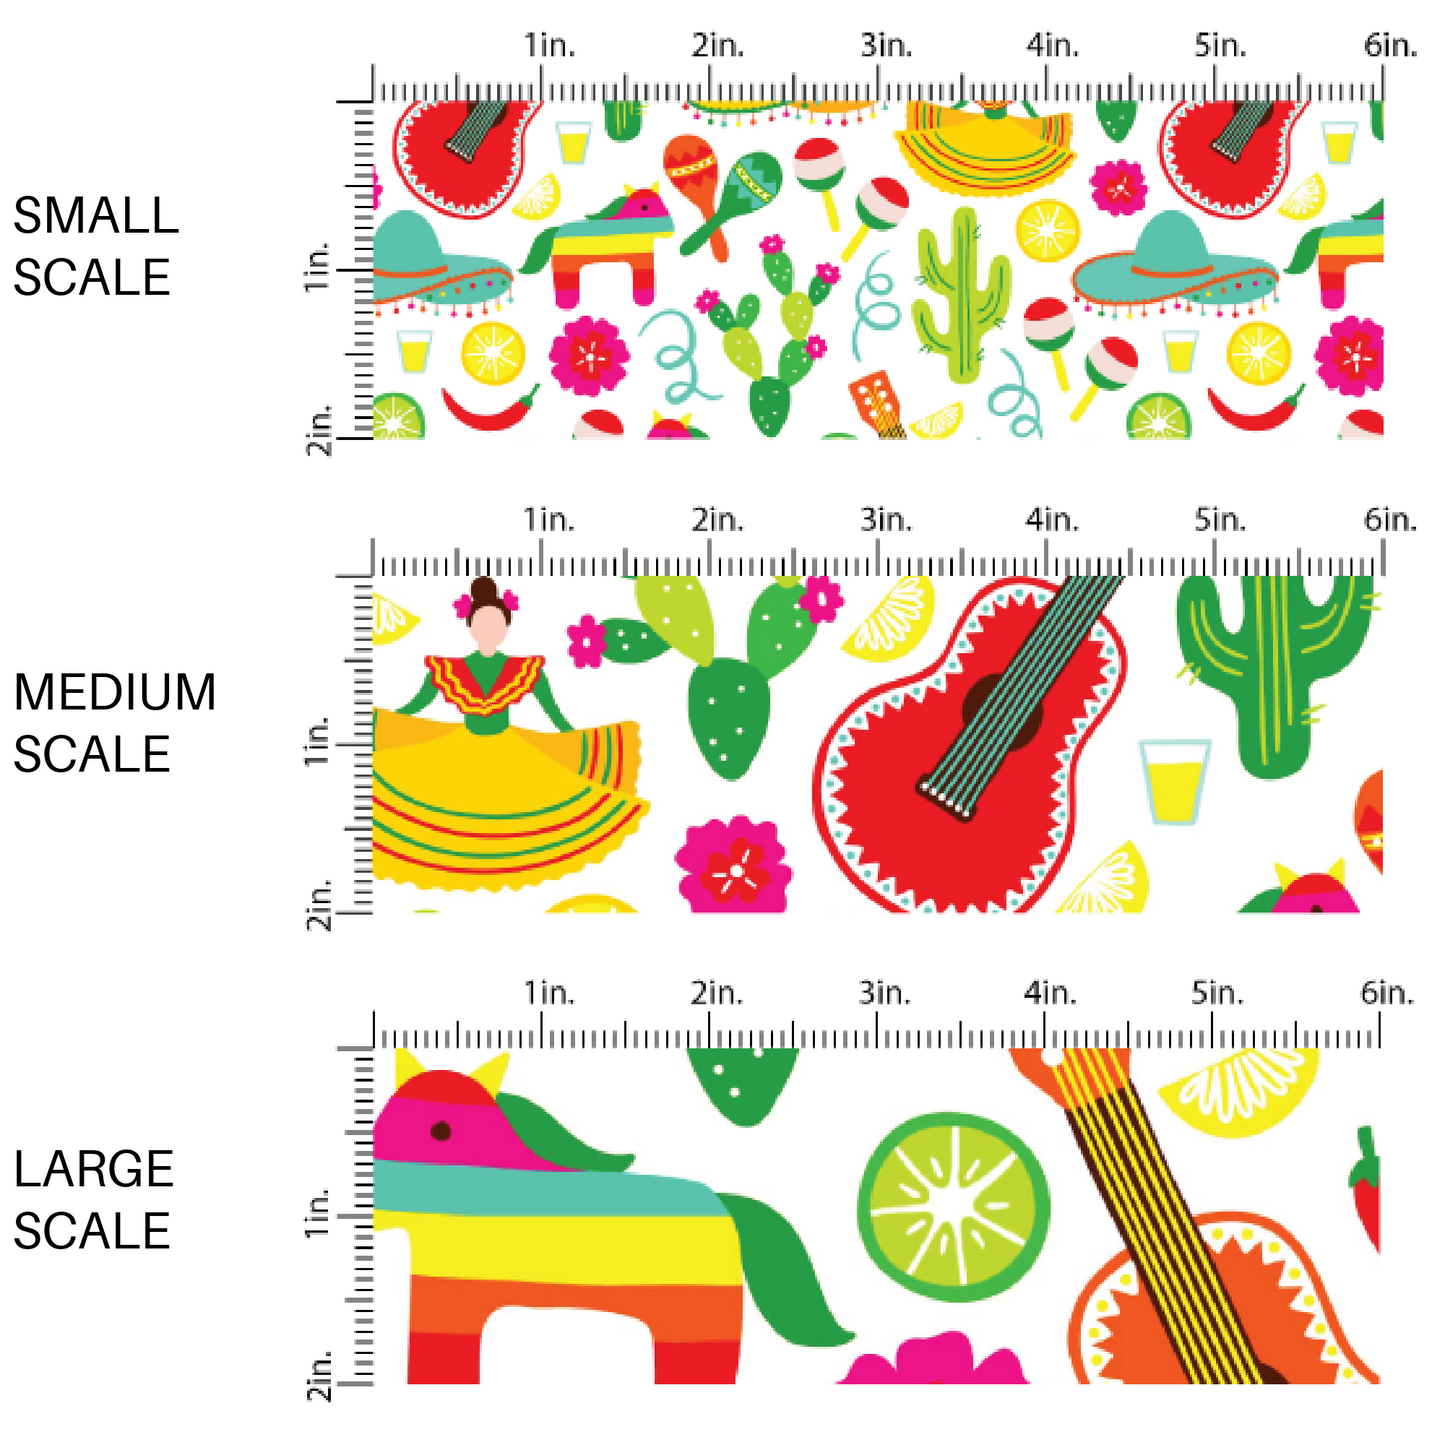 Cinco De Mayo fabric by the yard scaled image guide with guitars, cactus plants, maracas, and piñatas. 